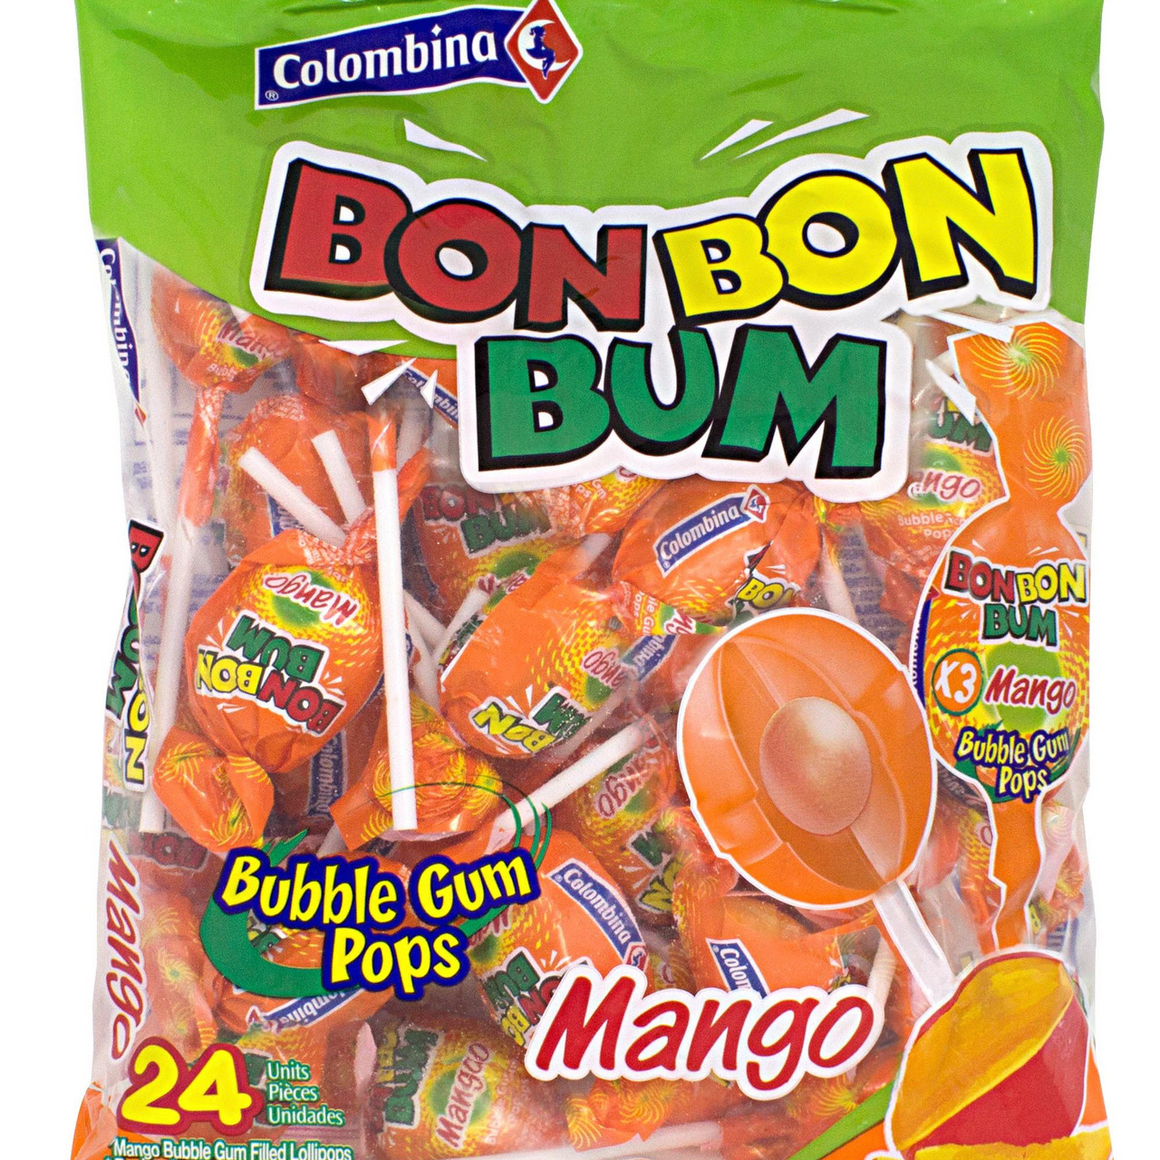 All City Candy Colombina Bon Bon Bum Mango 24 count Pops 14.4 oz. Bag Lollipops & Suckers Colombina For fresh candy and great service, visit www.allcitycandy.com